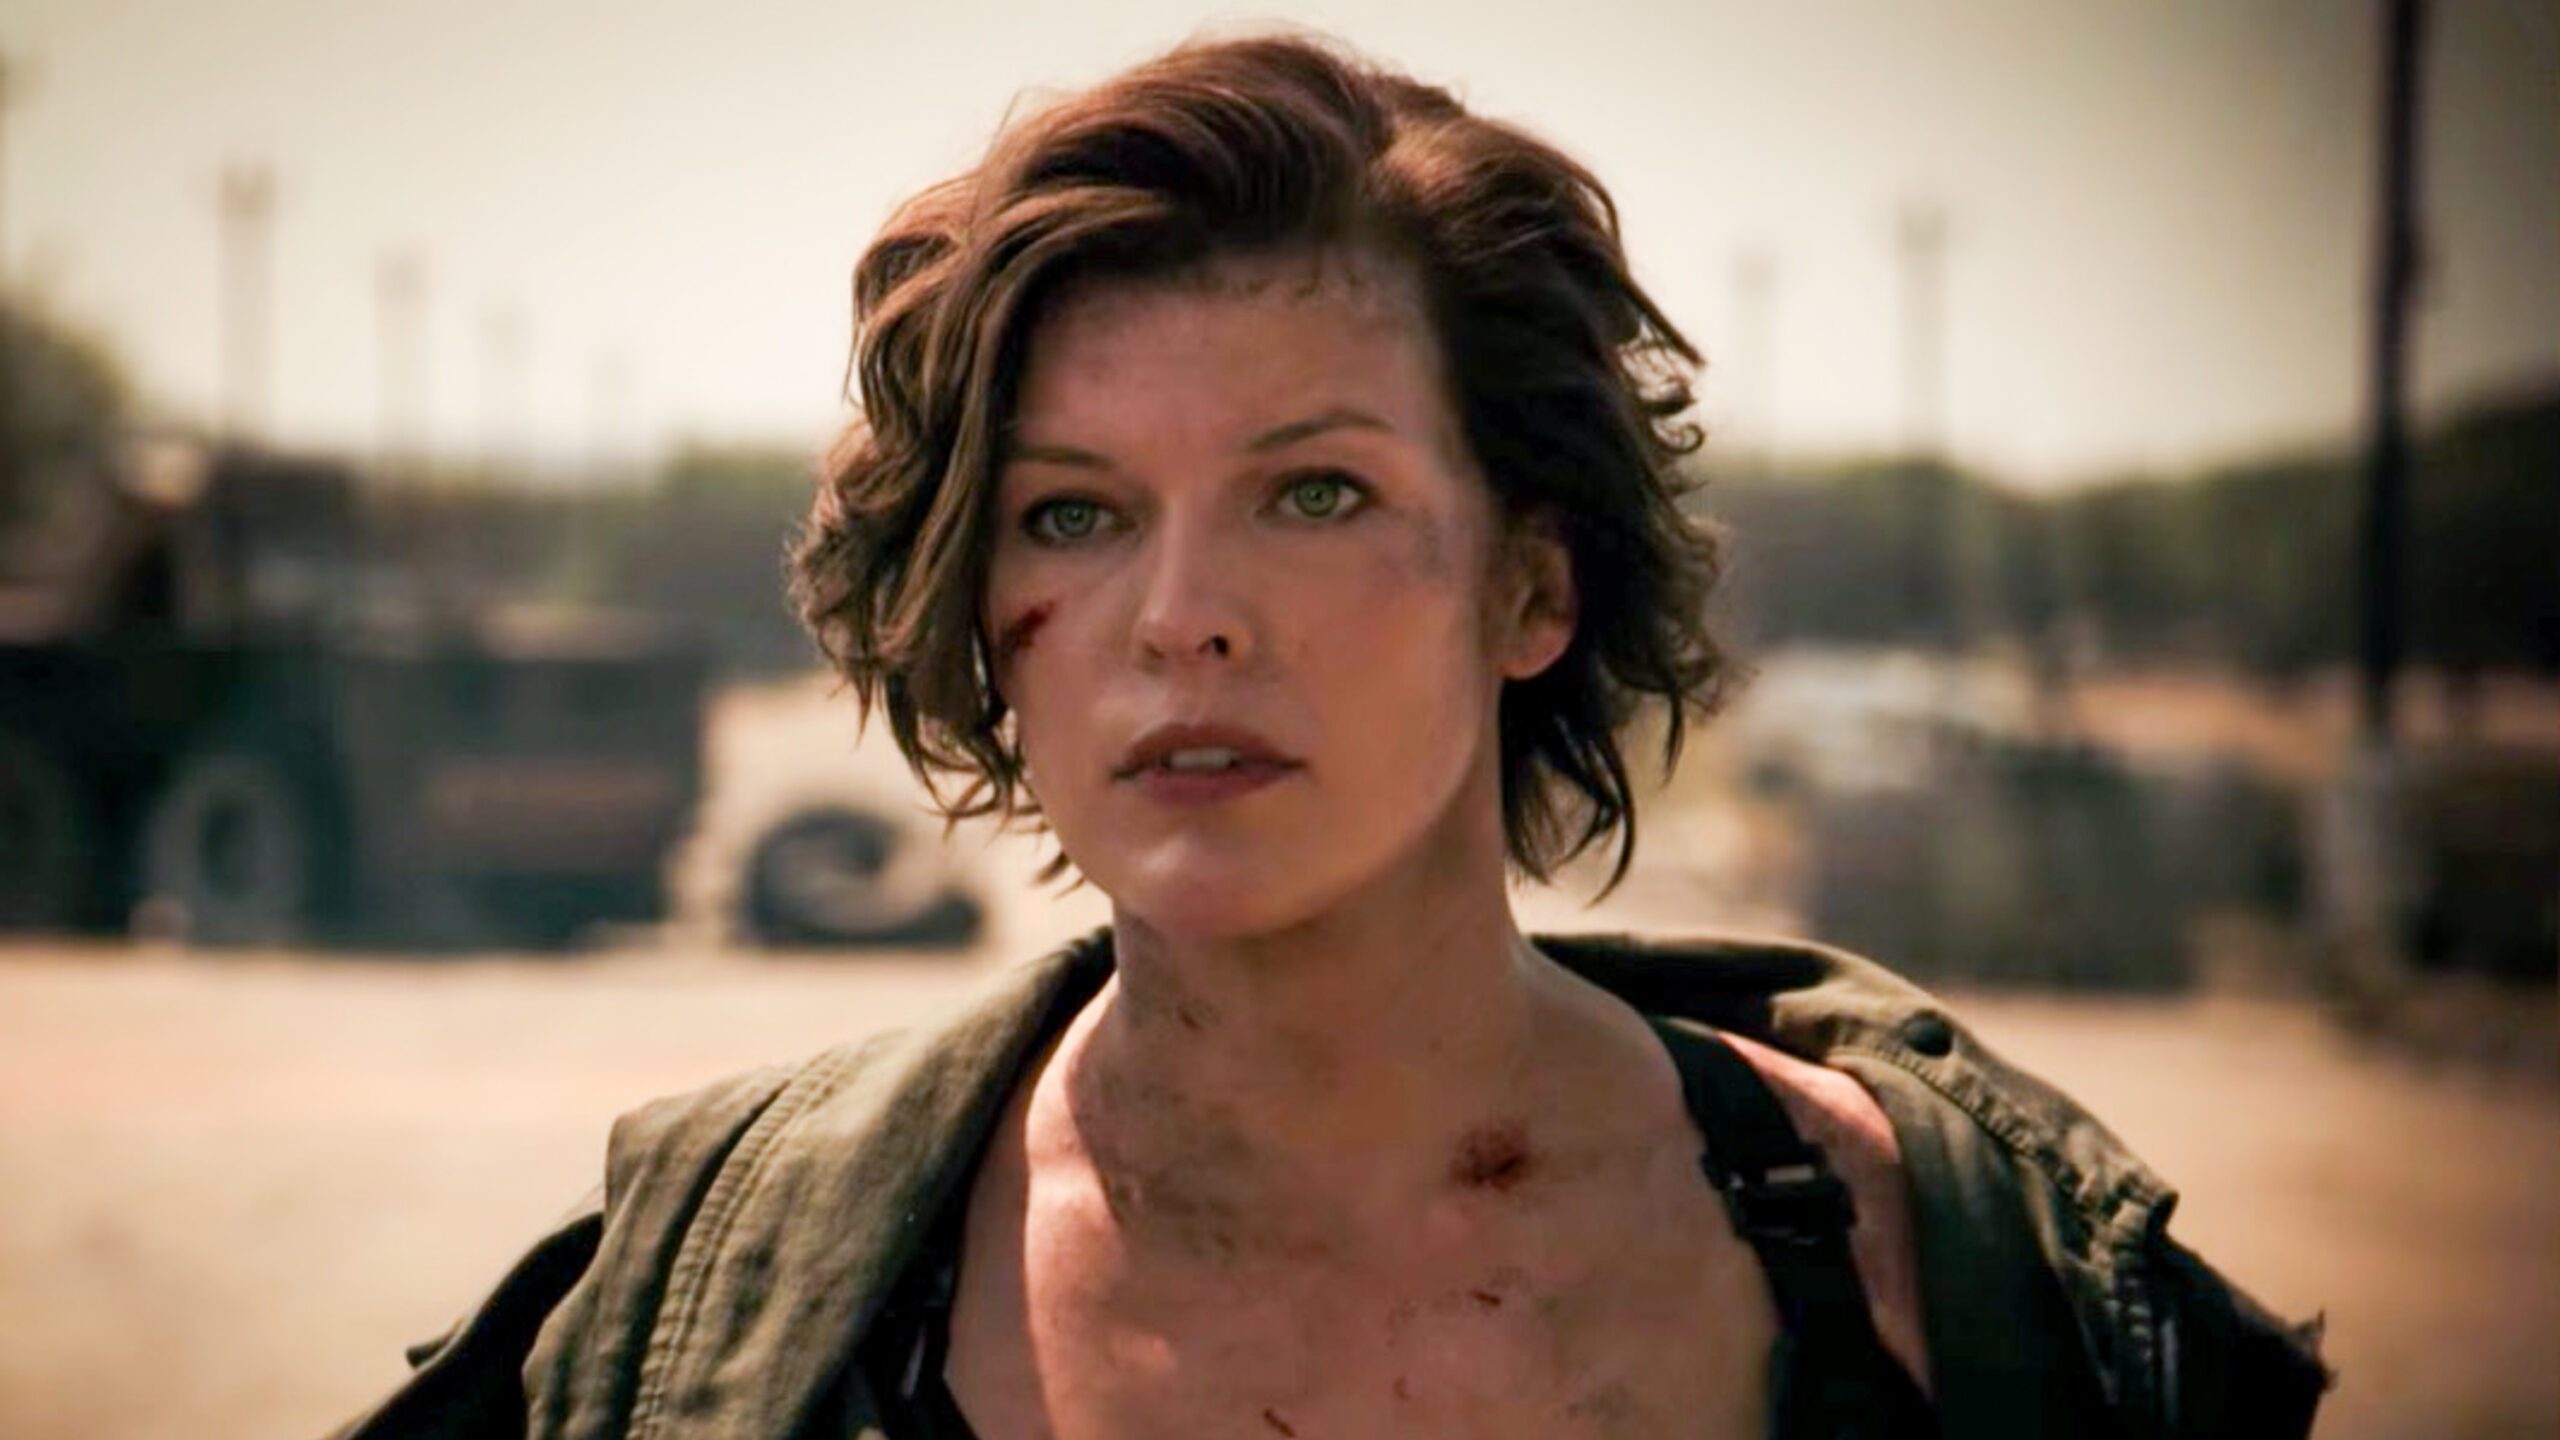 Resident Evil: The Final Chapter trailer says it's over for Alice